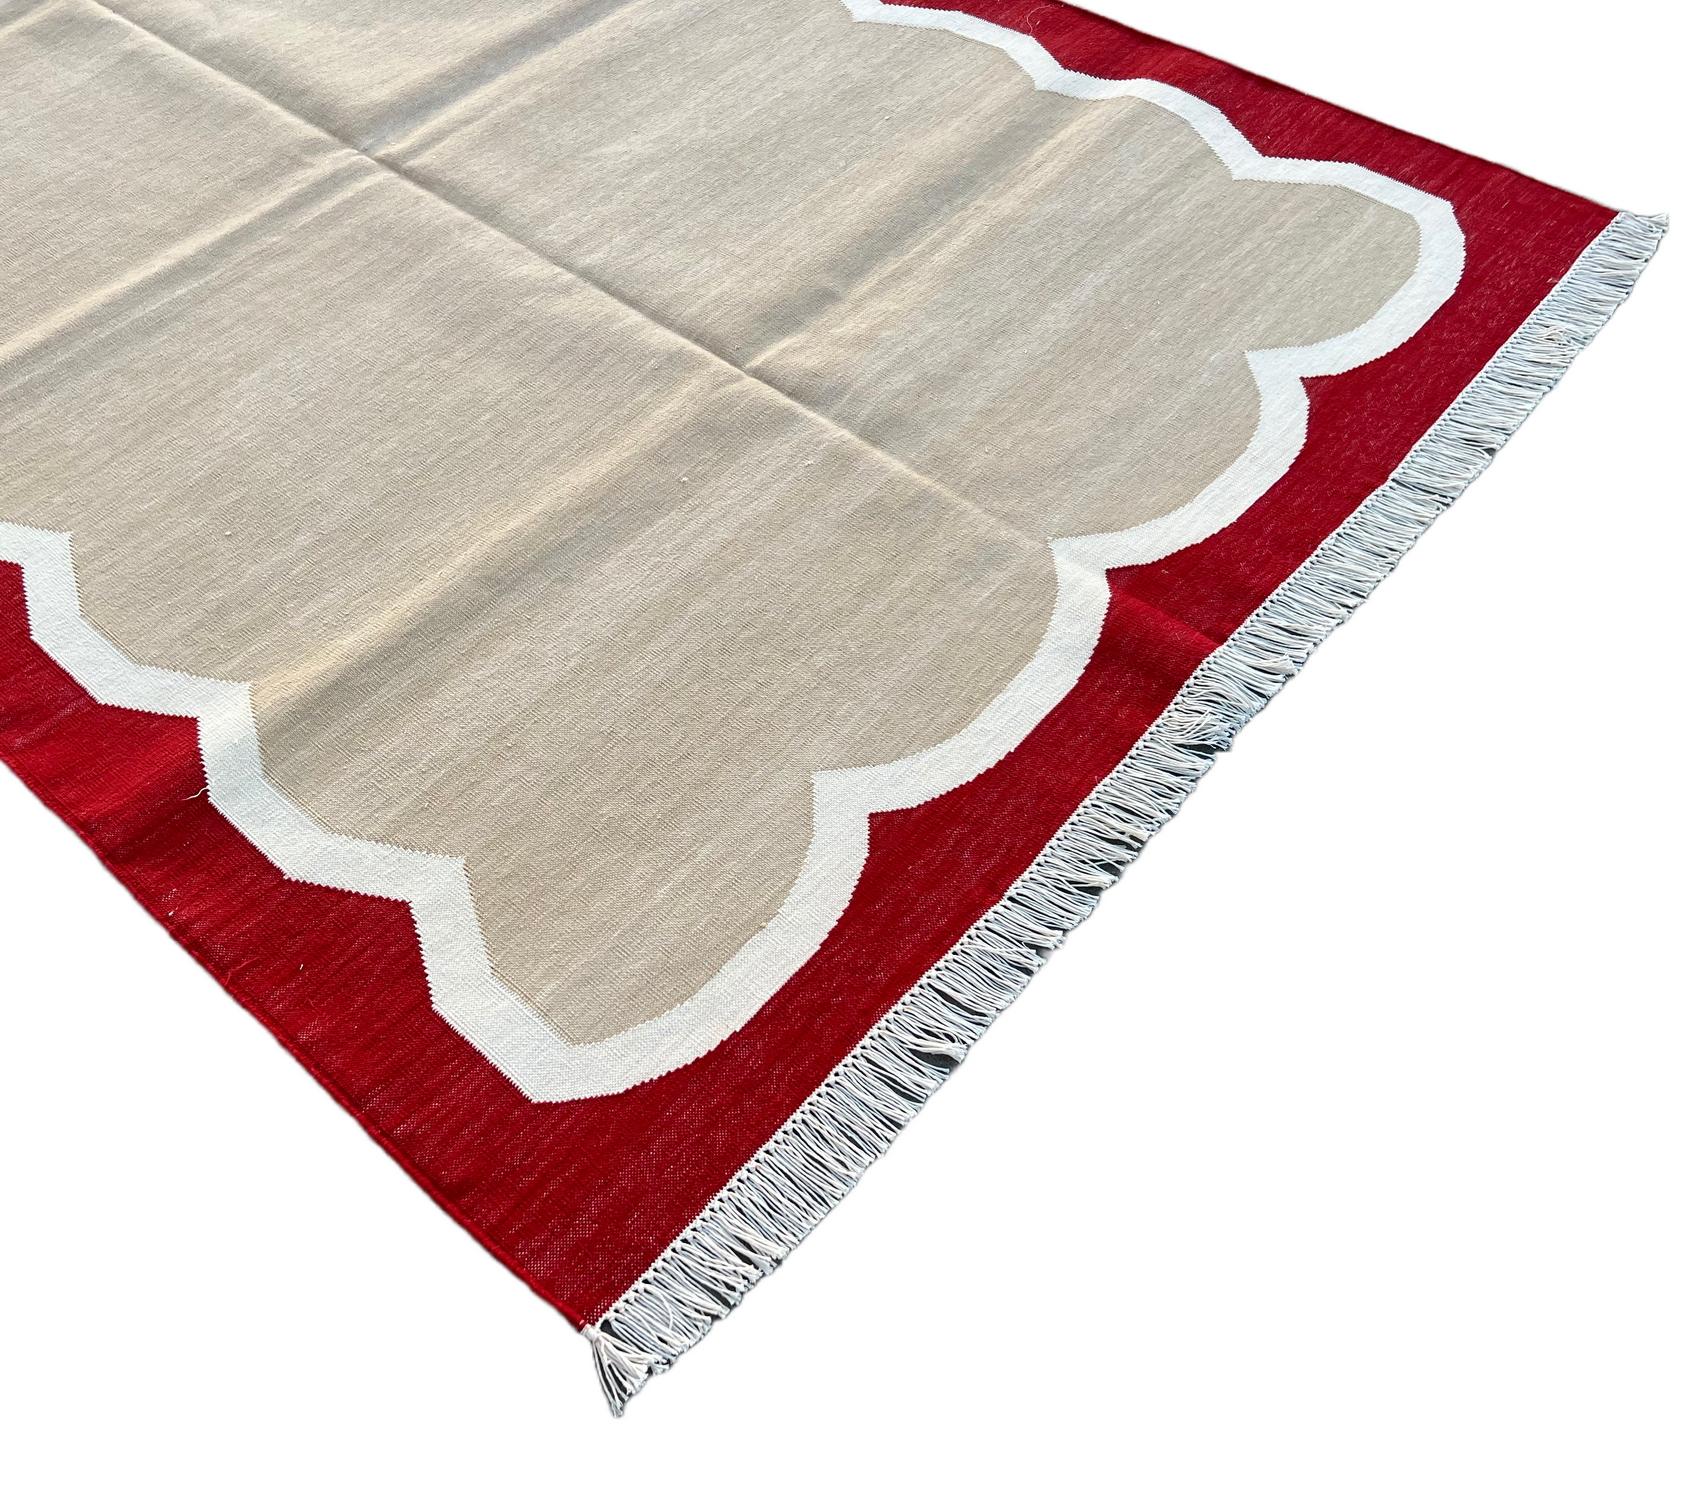 Hand-Woven Handmade Cotton Area Flat Weave Rug, 4x6 Beige And Red Scalloped Indian Dhurrie For Sale